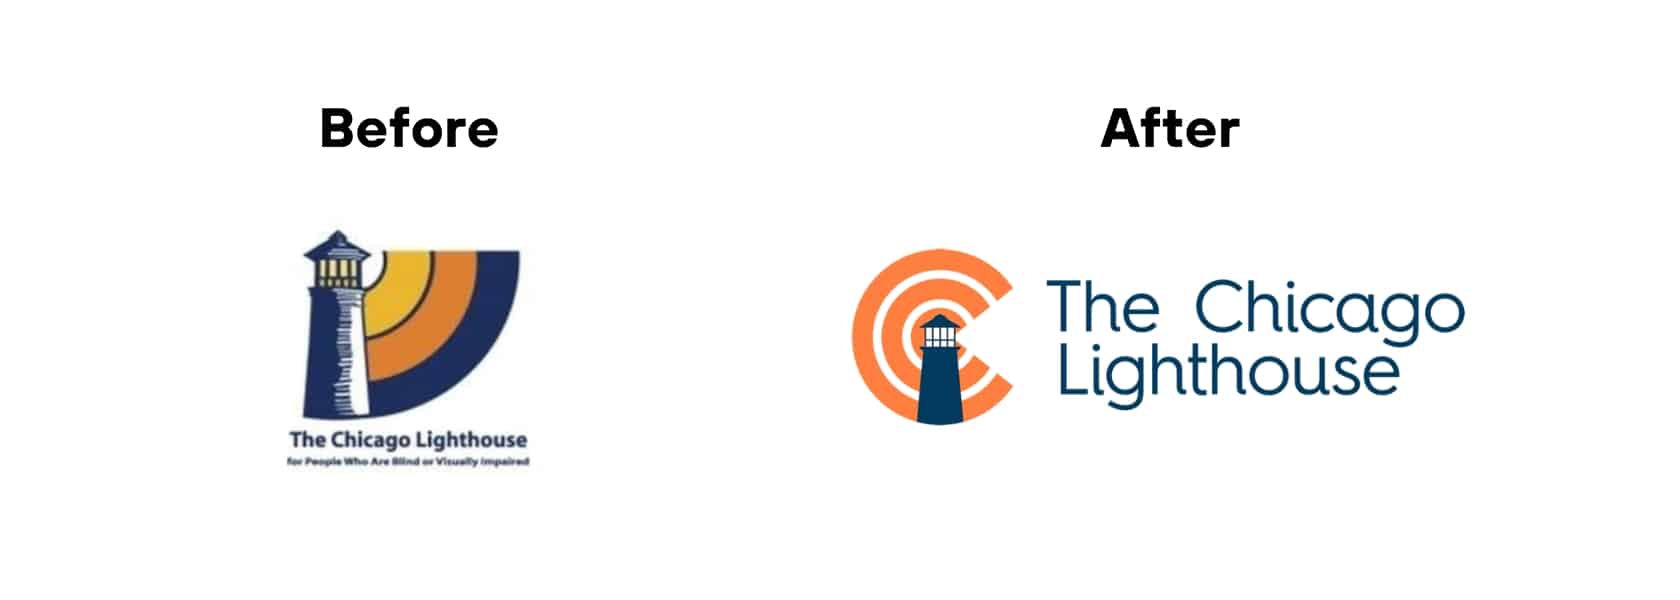 The Chicago Lighthouse organization logos before and after comparison